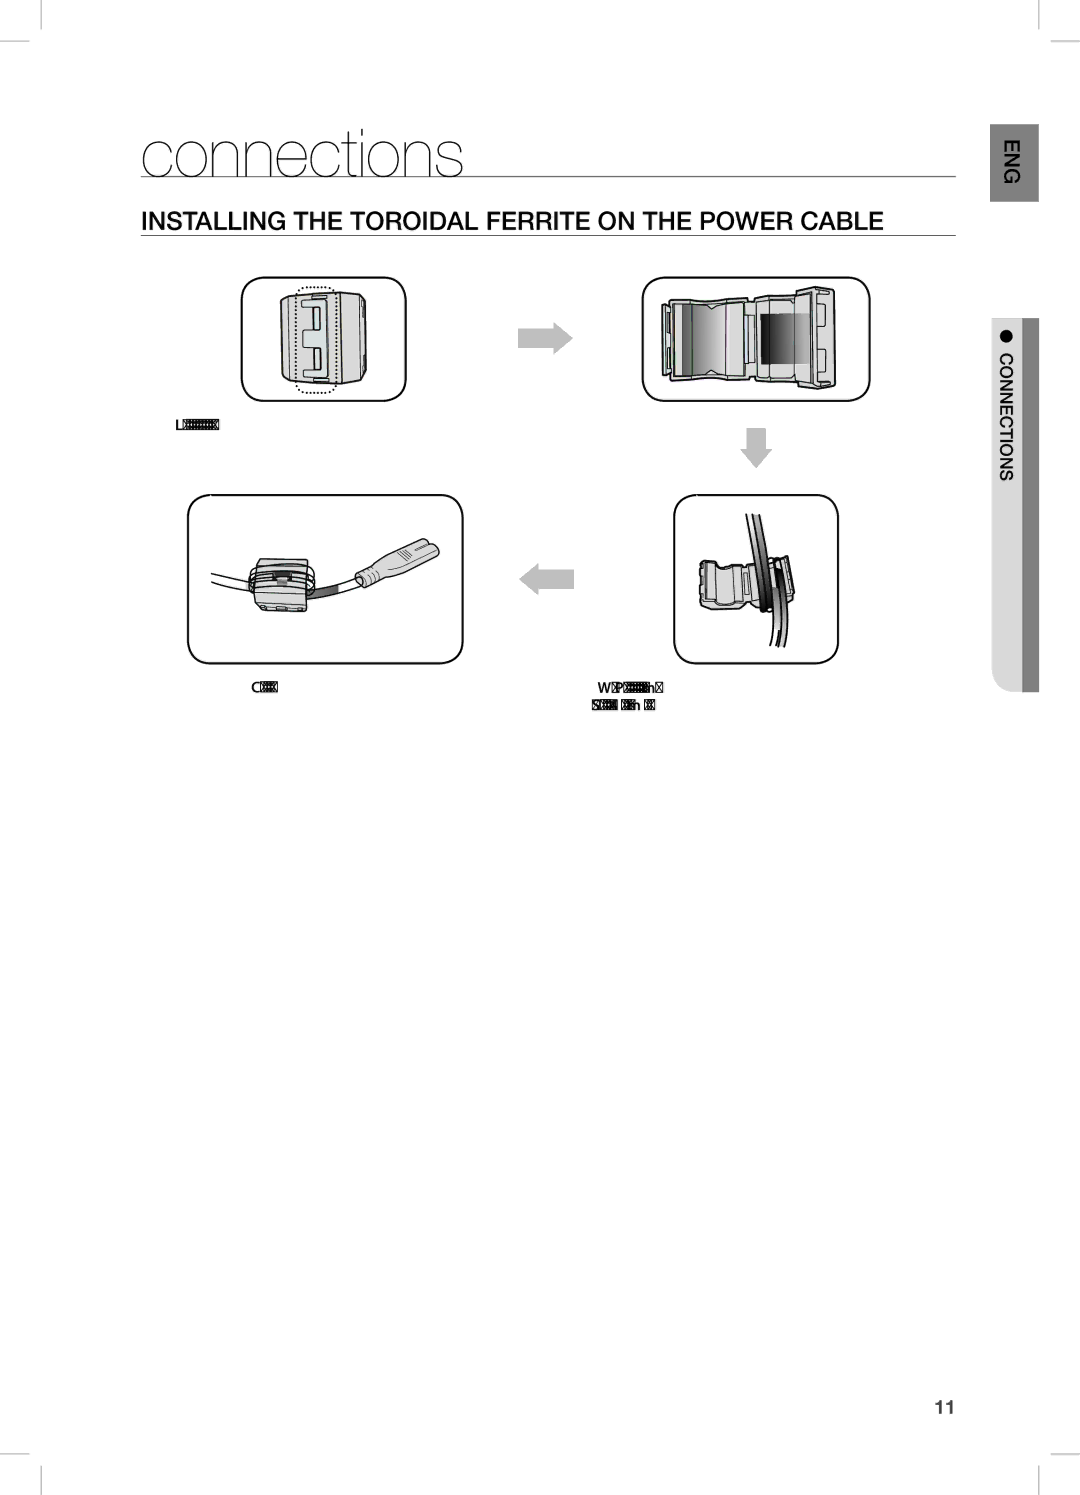 Samsung DAE670ZA, DA-E670 user manual Connections, InstaLLing the toroidaL ferrite on the PoWer caBLe 